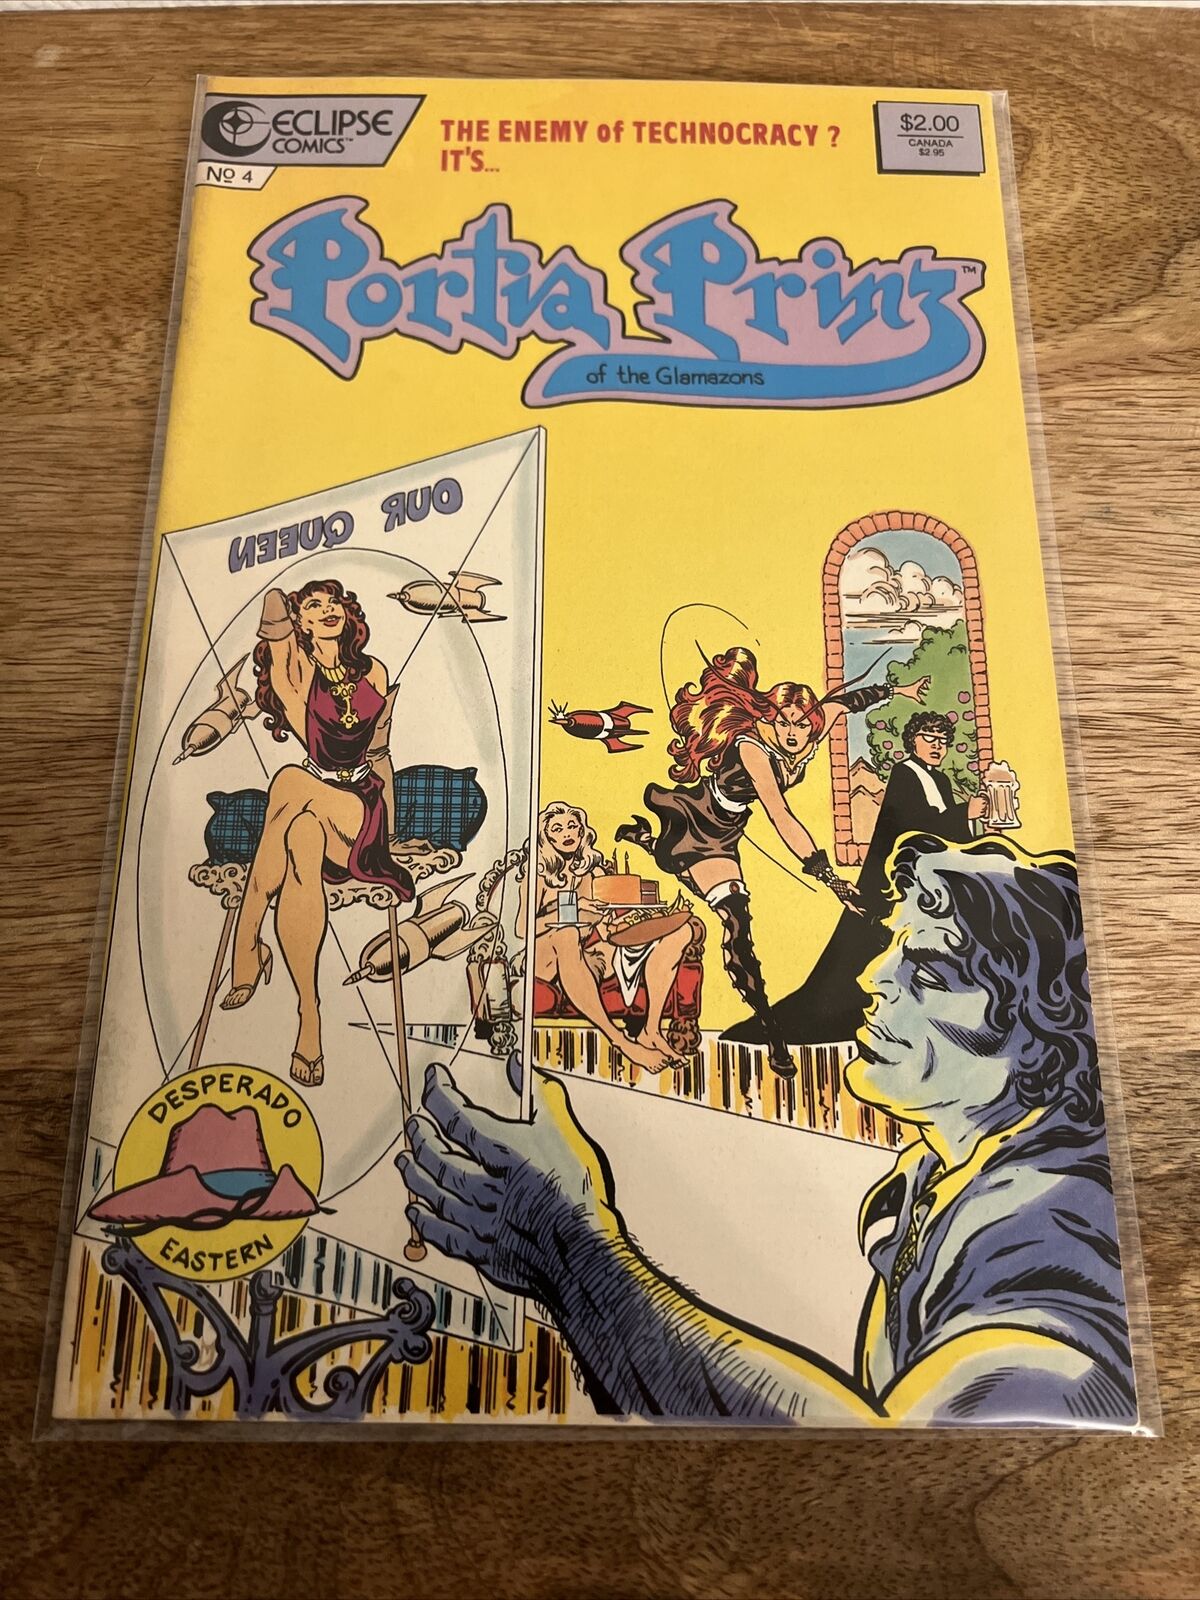 Portia Prinz of the Glamazons Issue# 4 Eclipse 1987  Richard Howell Comic Book